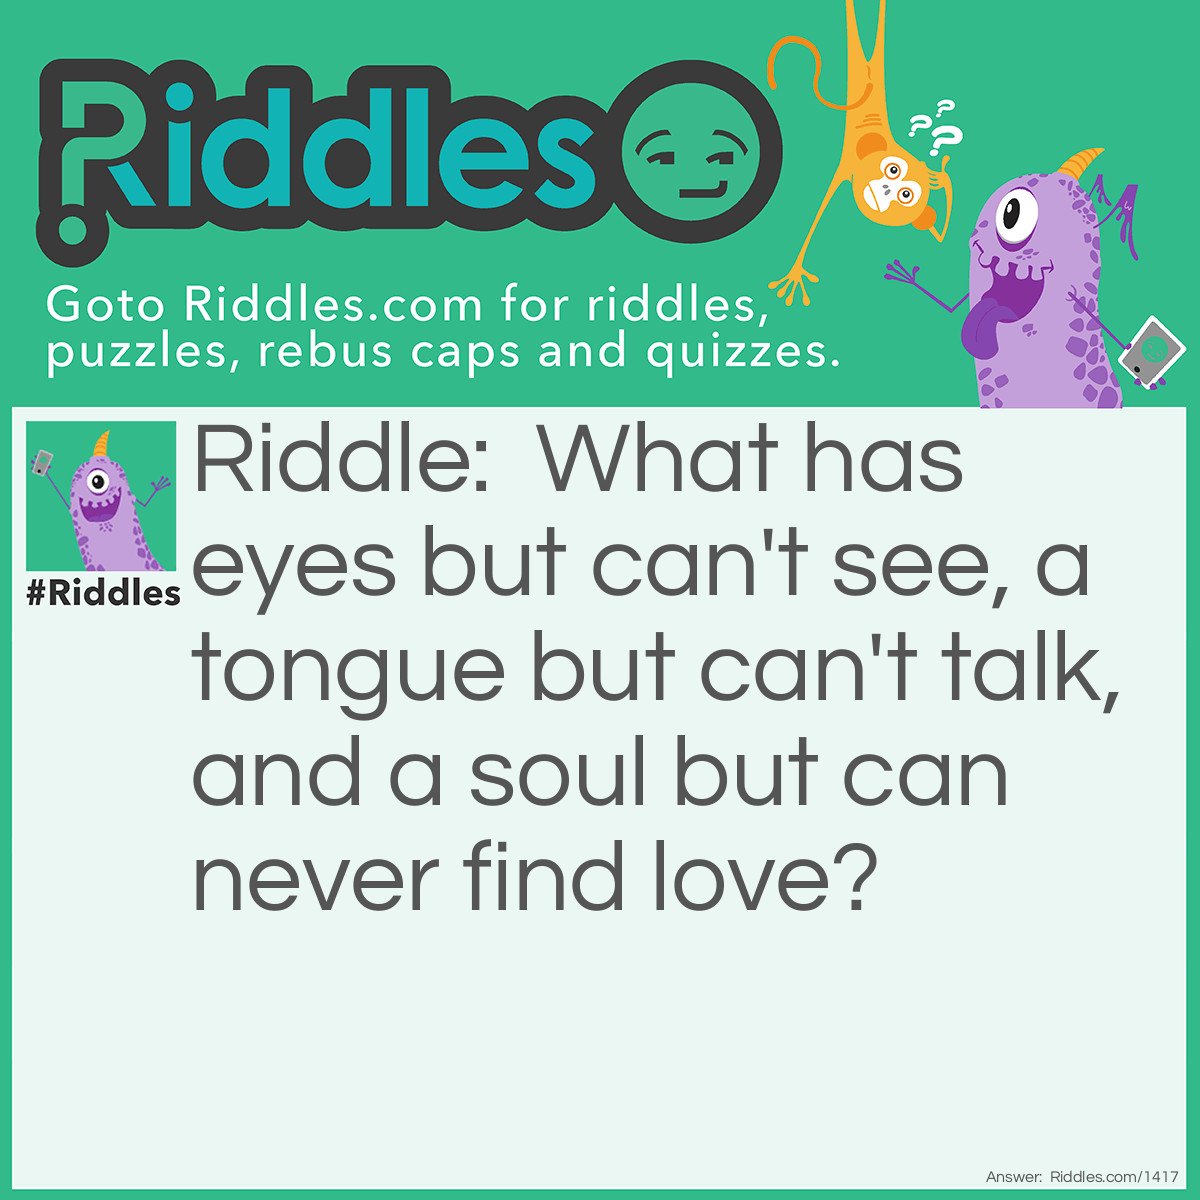 Riddle: What has eyes but can't see, a tongue but can't talk, and a soul but can never find love? Answer: A shoe.